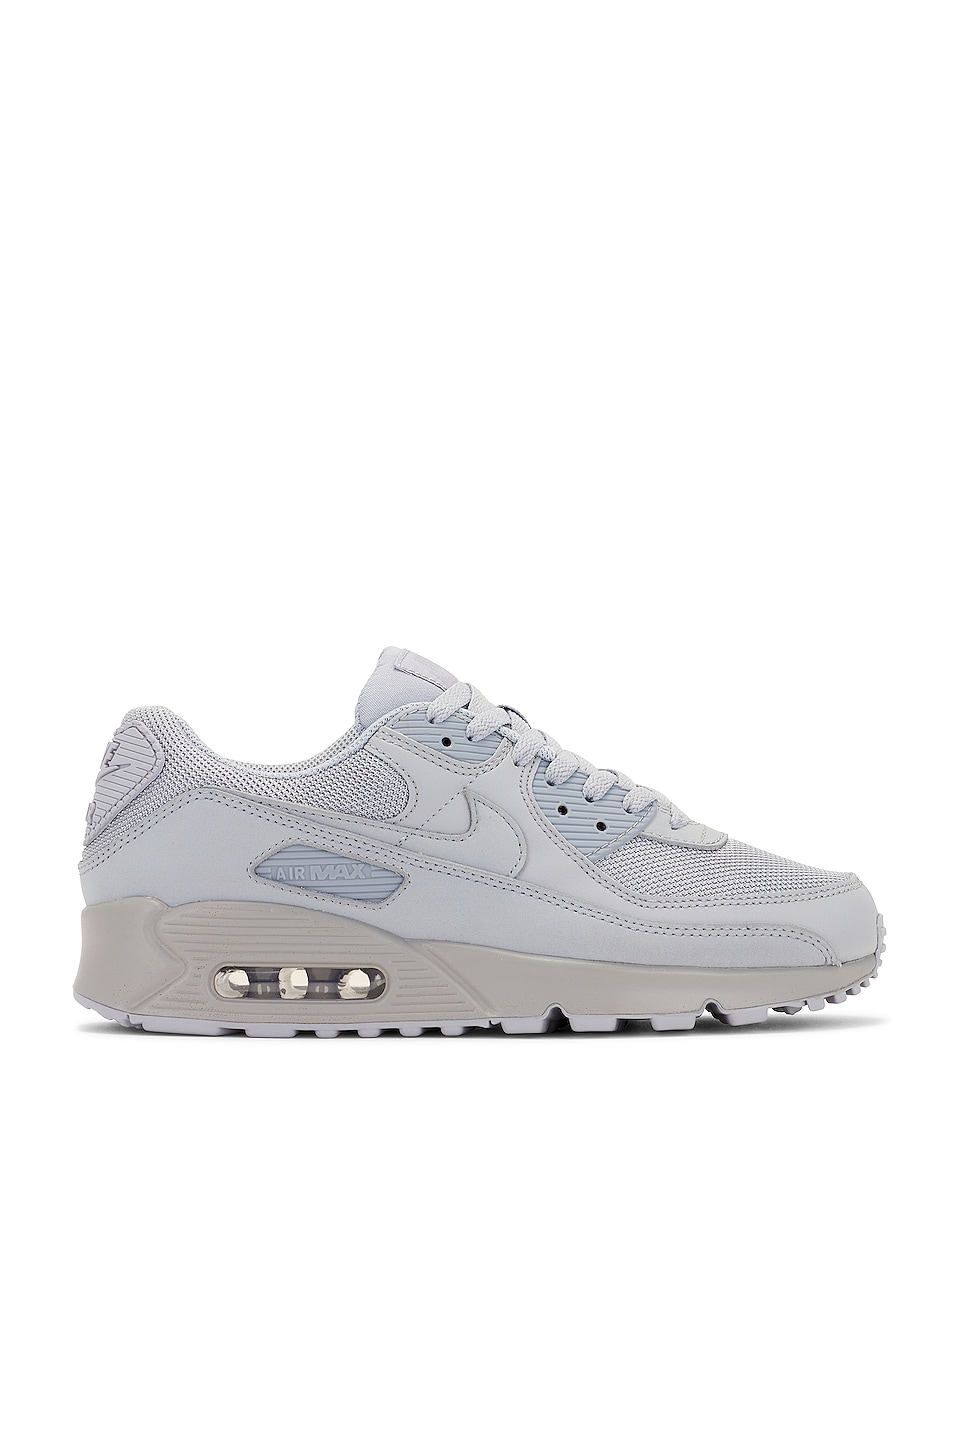 wolf grey and white air max 90